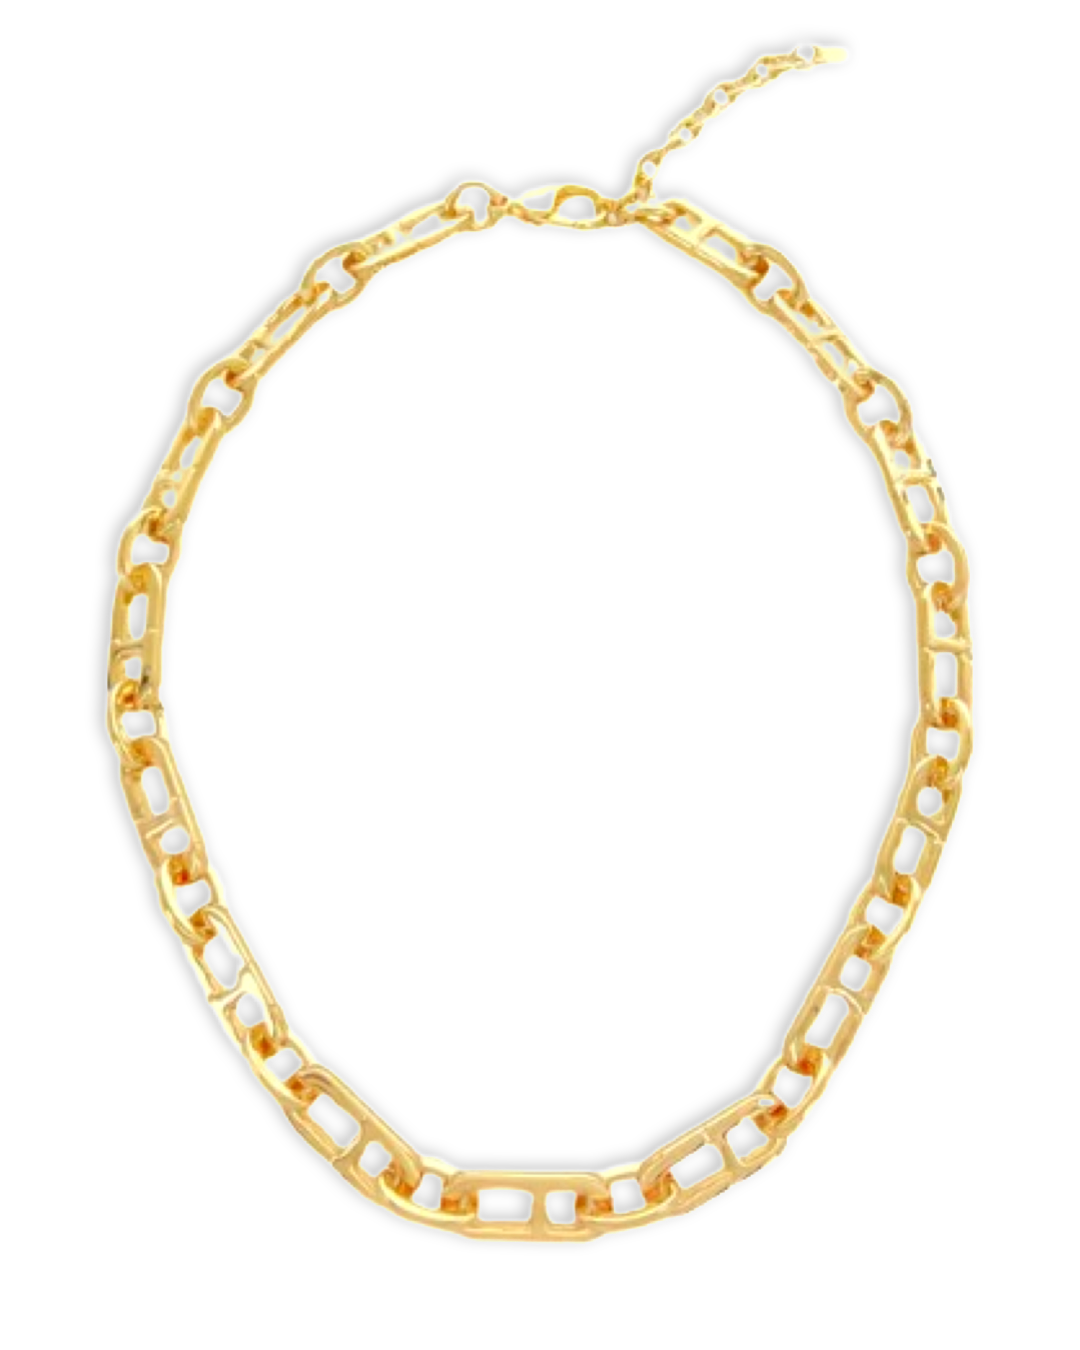 Mariner Chainlink Necklace in Gold